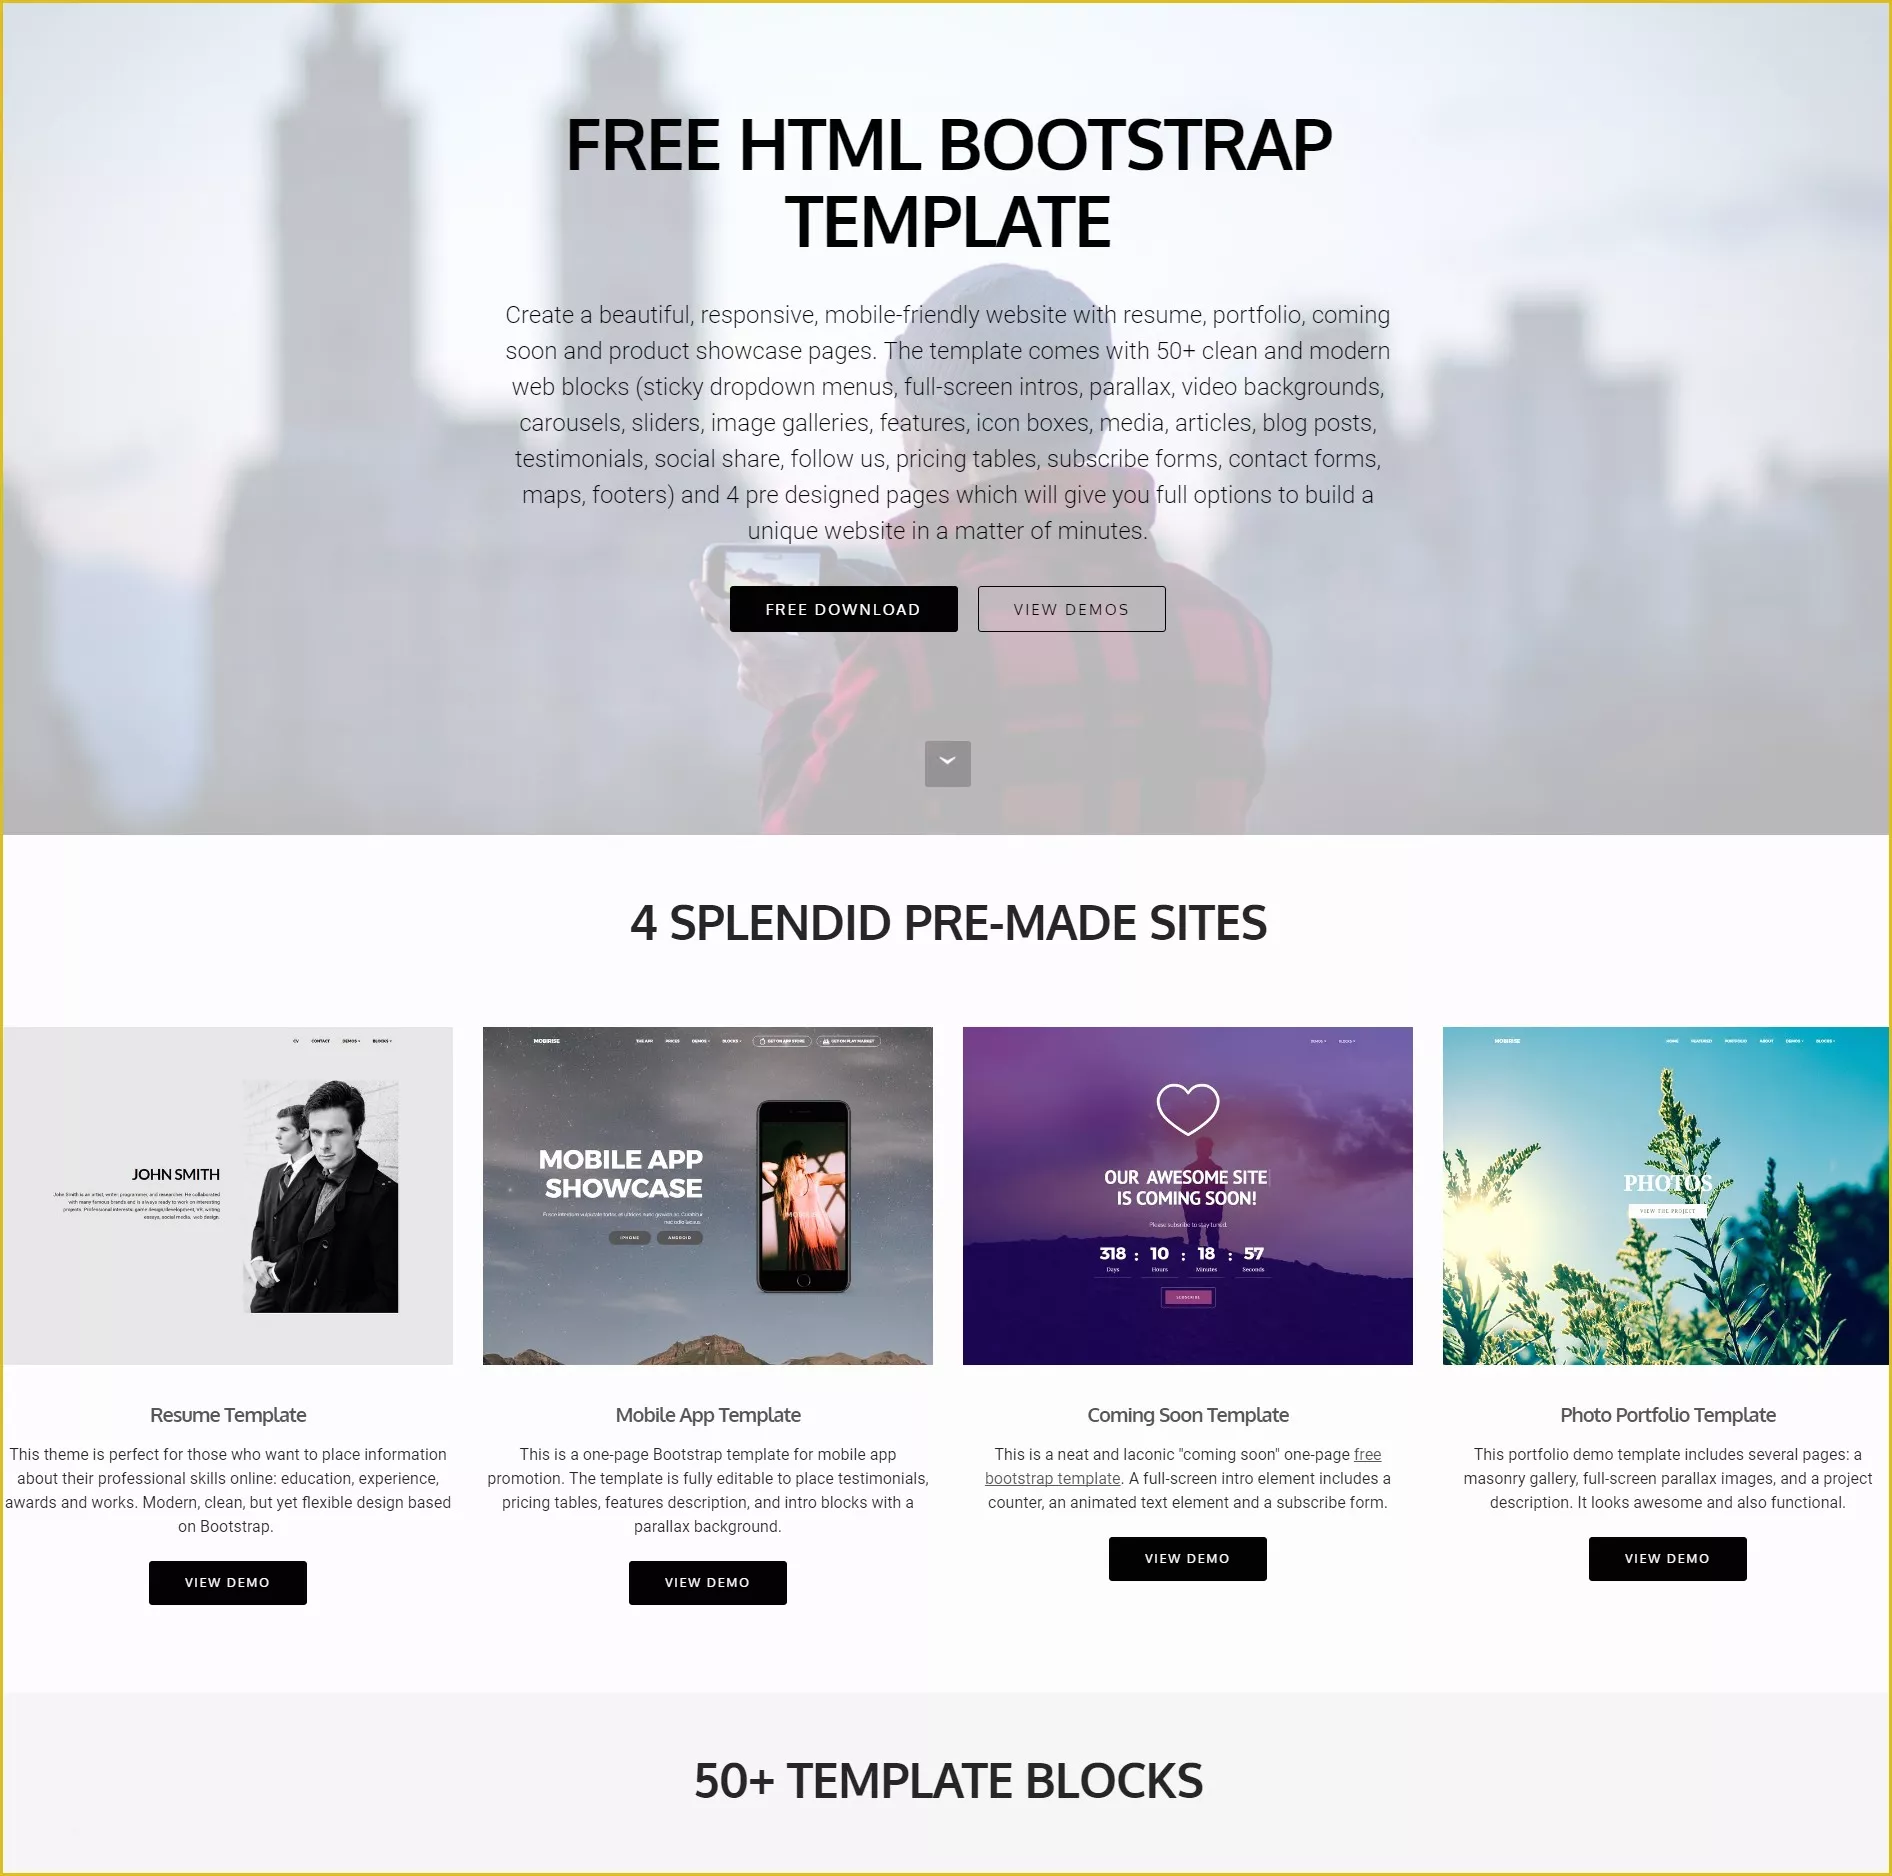 Templates for Pages Free Download Of 95 Free Bootstrap themes Expected to Get In the top In 2019